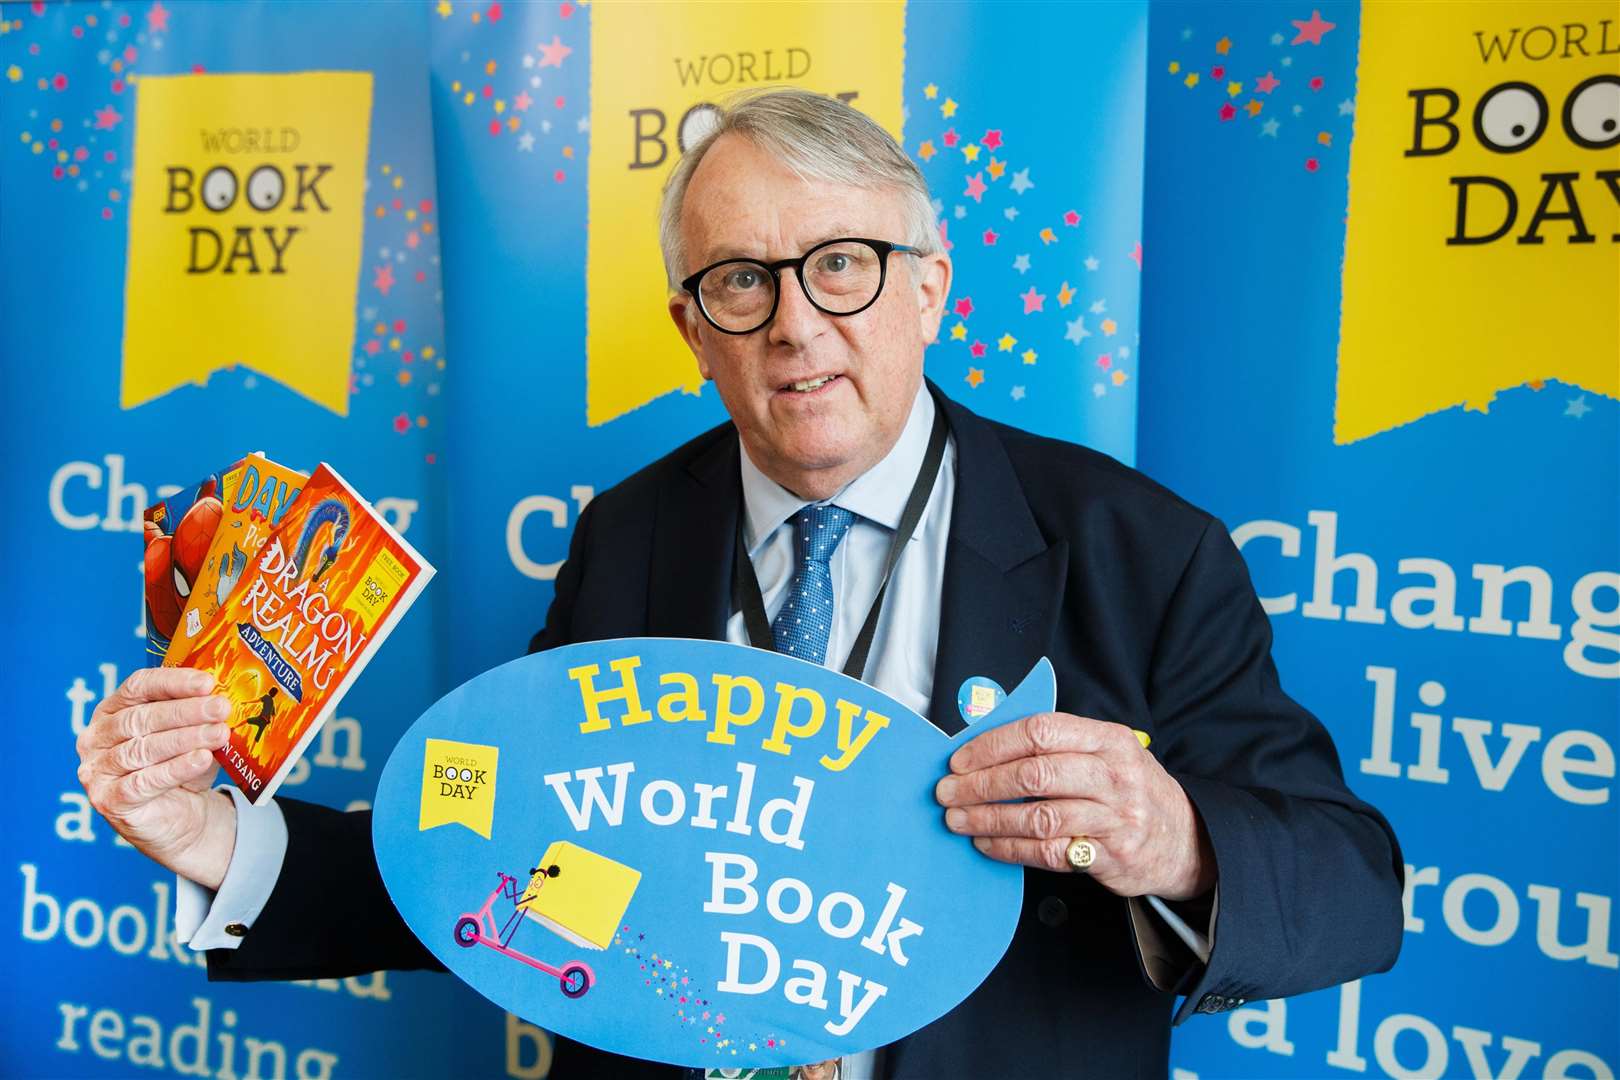 Jamie Stone says he is delighted to celebrate his love of reading through the World Book Day campaign. Picture: Katrina Dimech